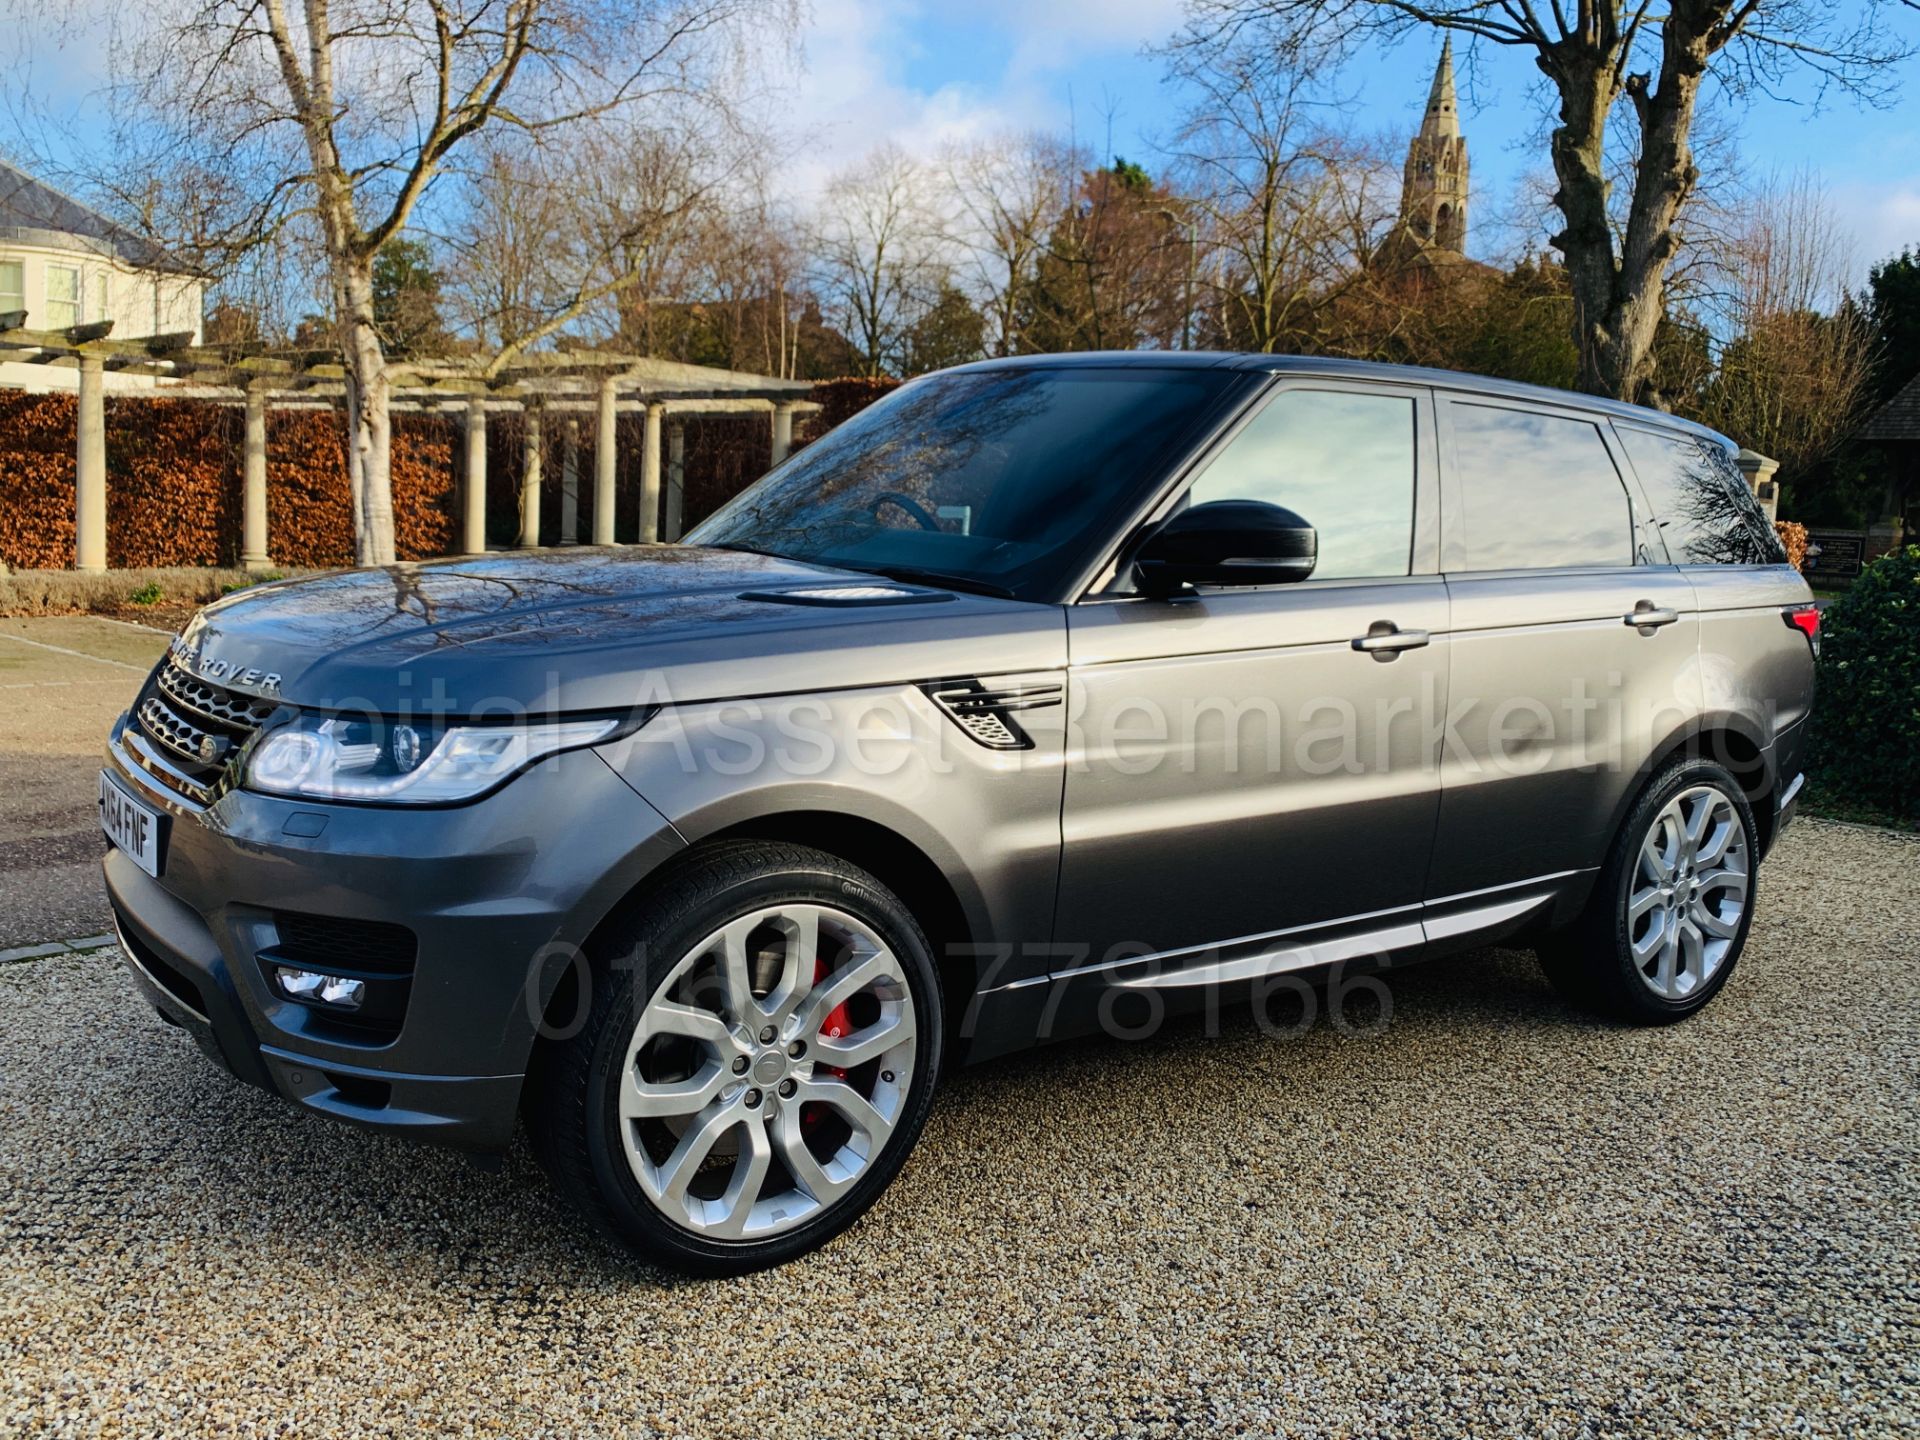 On Sale RANGE ROVER SPORT *AUTOBIOGRAPHY DYNAMIC* (2015 MODEL) '3.0 SDV6 - 8 SPEED AUTO' HIGE SPEC - Image 12 of 85